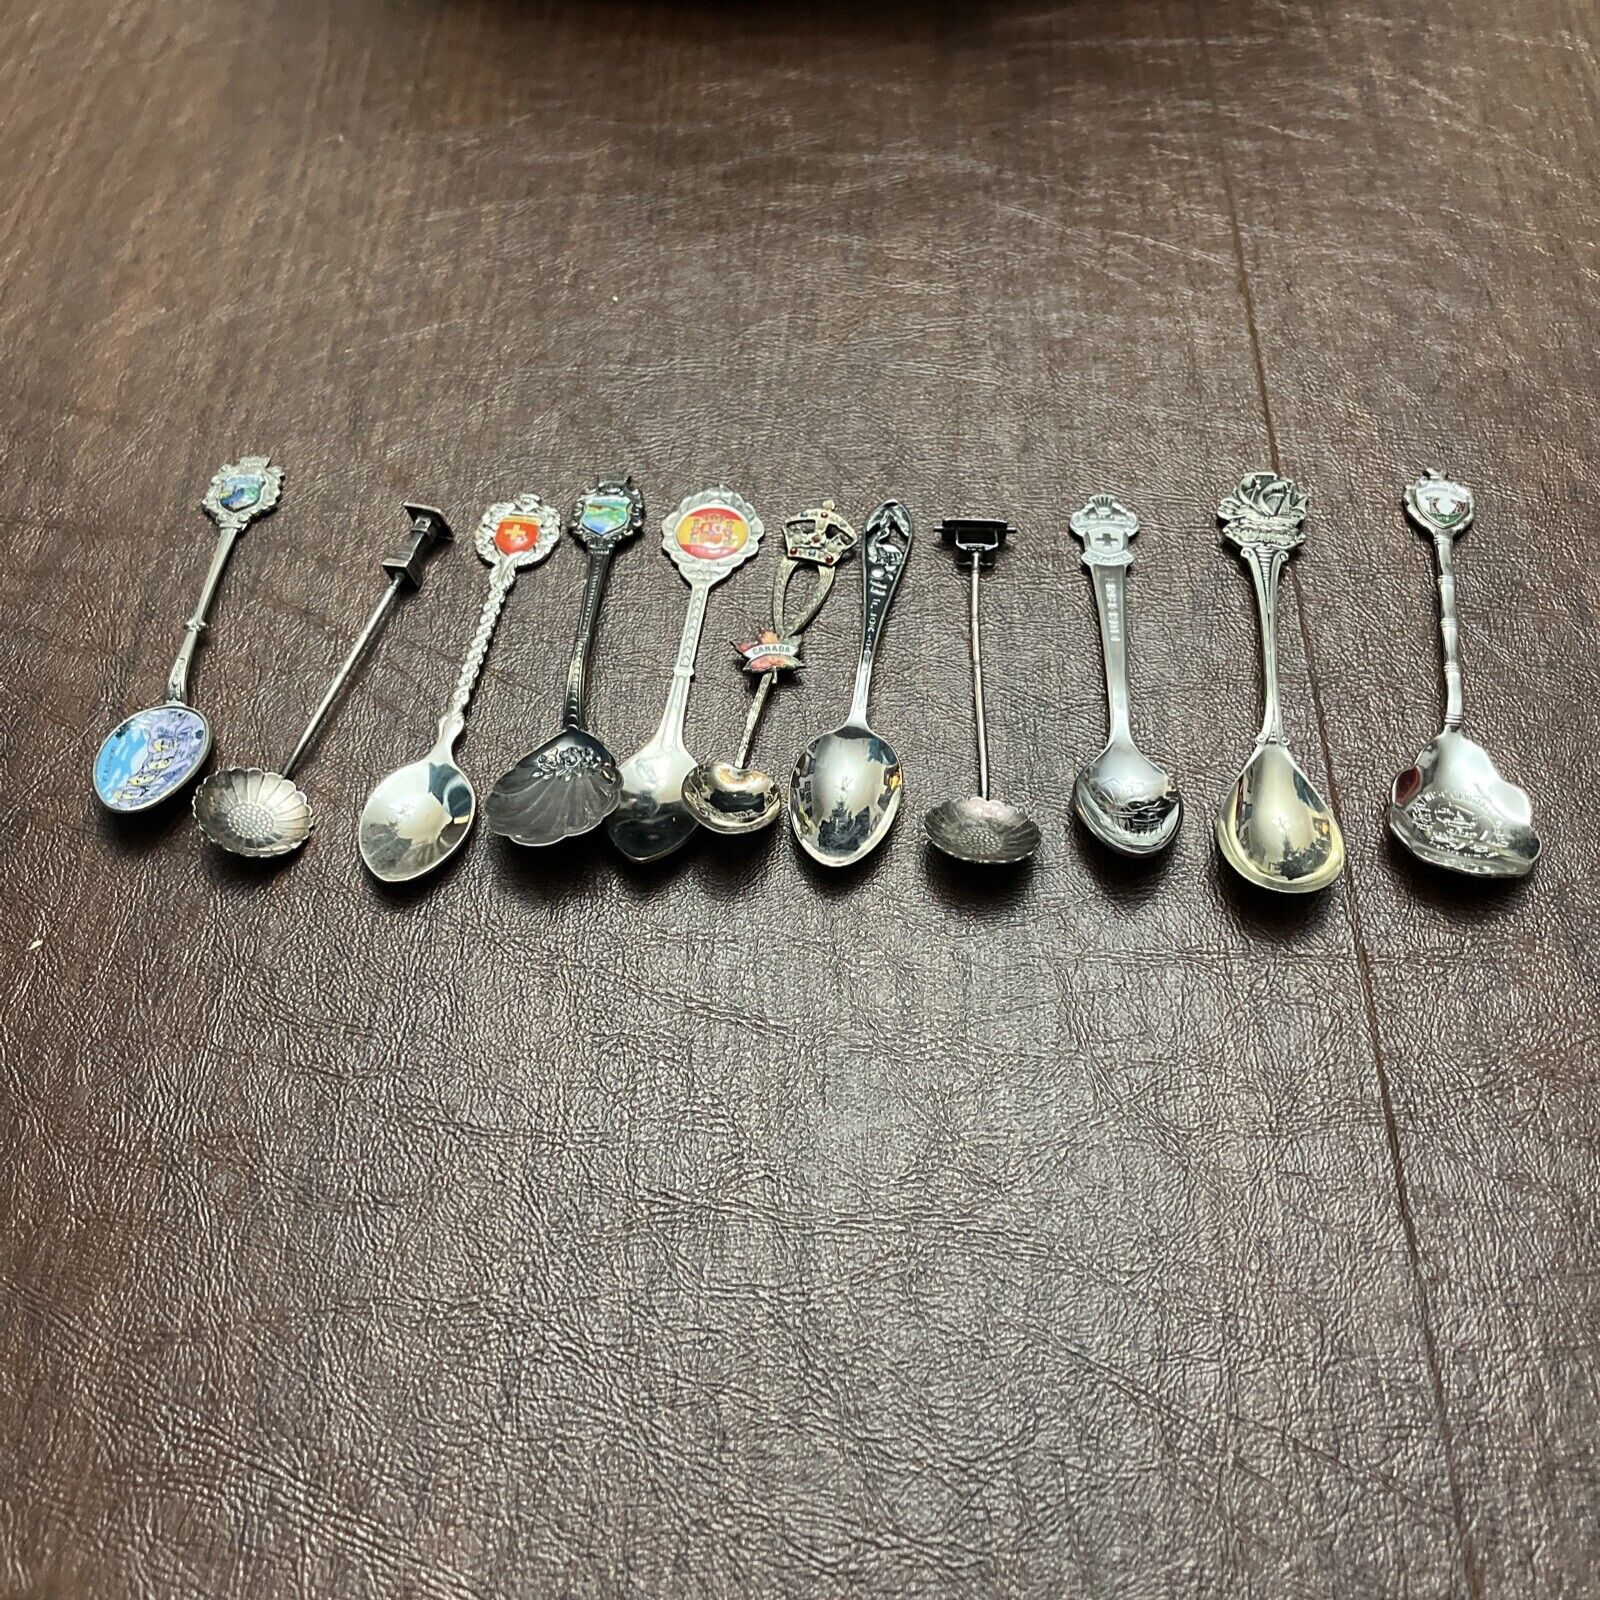 Vintage Collectible Spoons Set Of 11